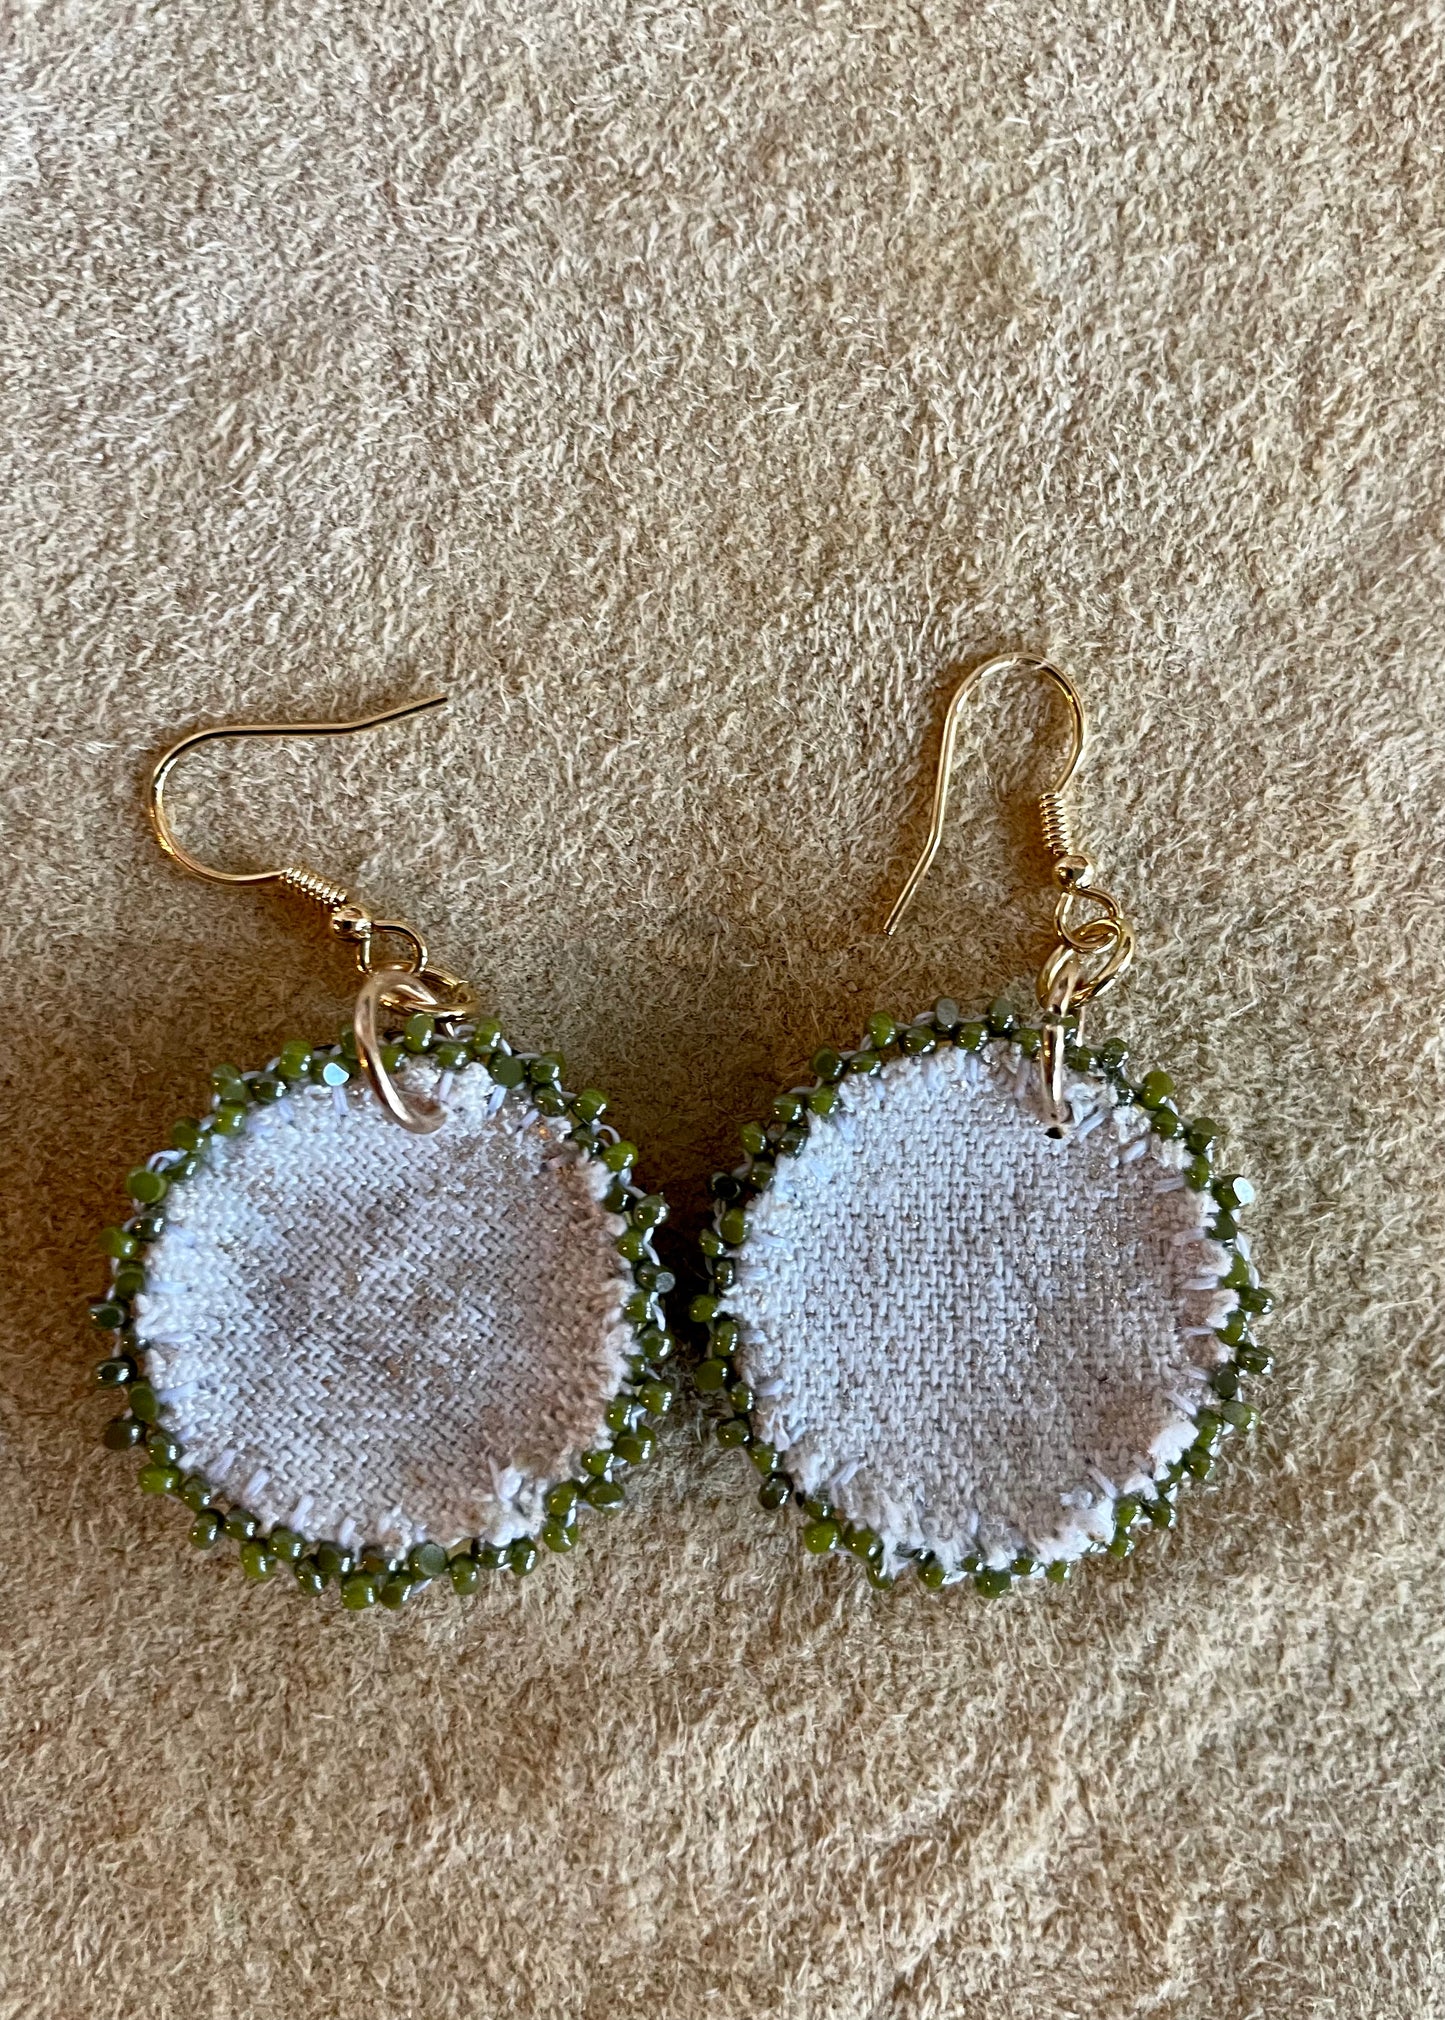 "Moss Only Grows on the North Side of Trees" Earrings